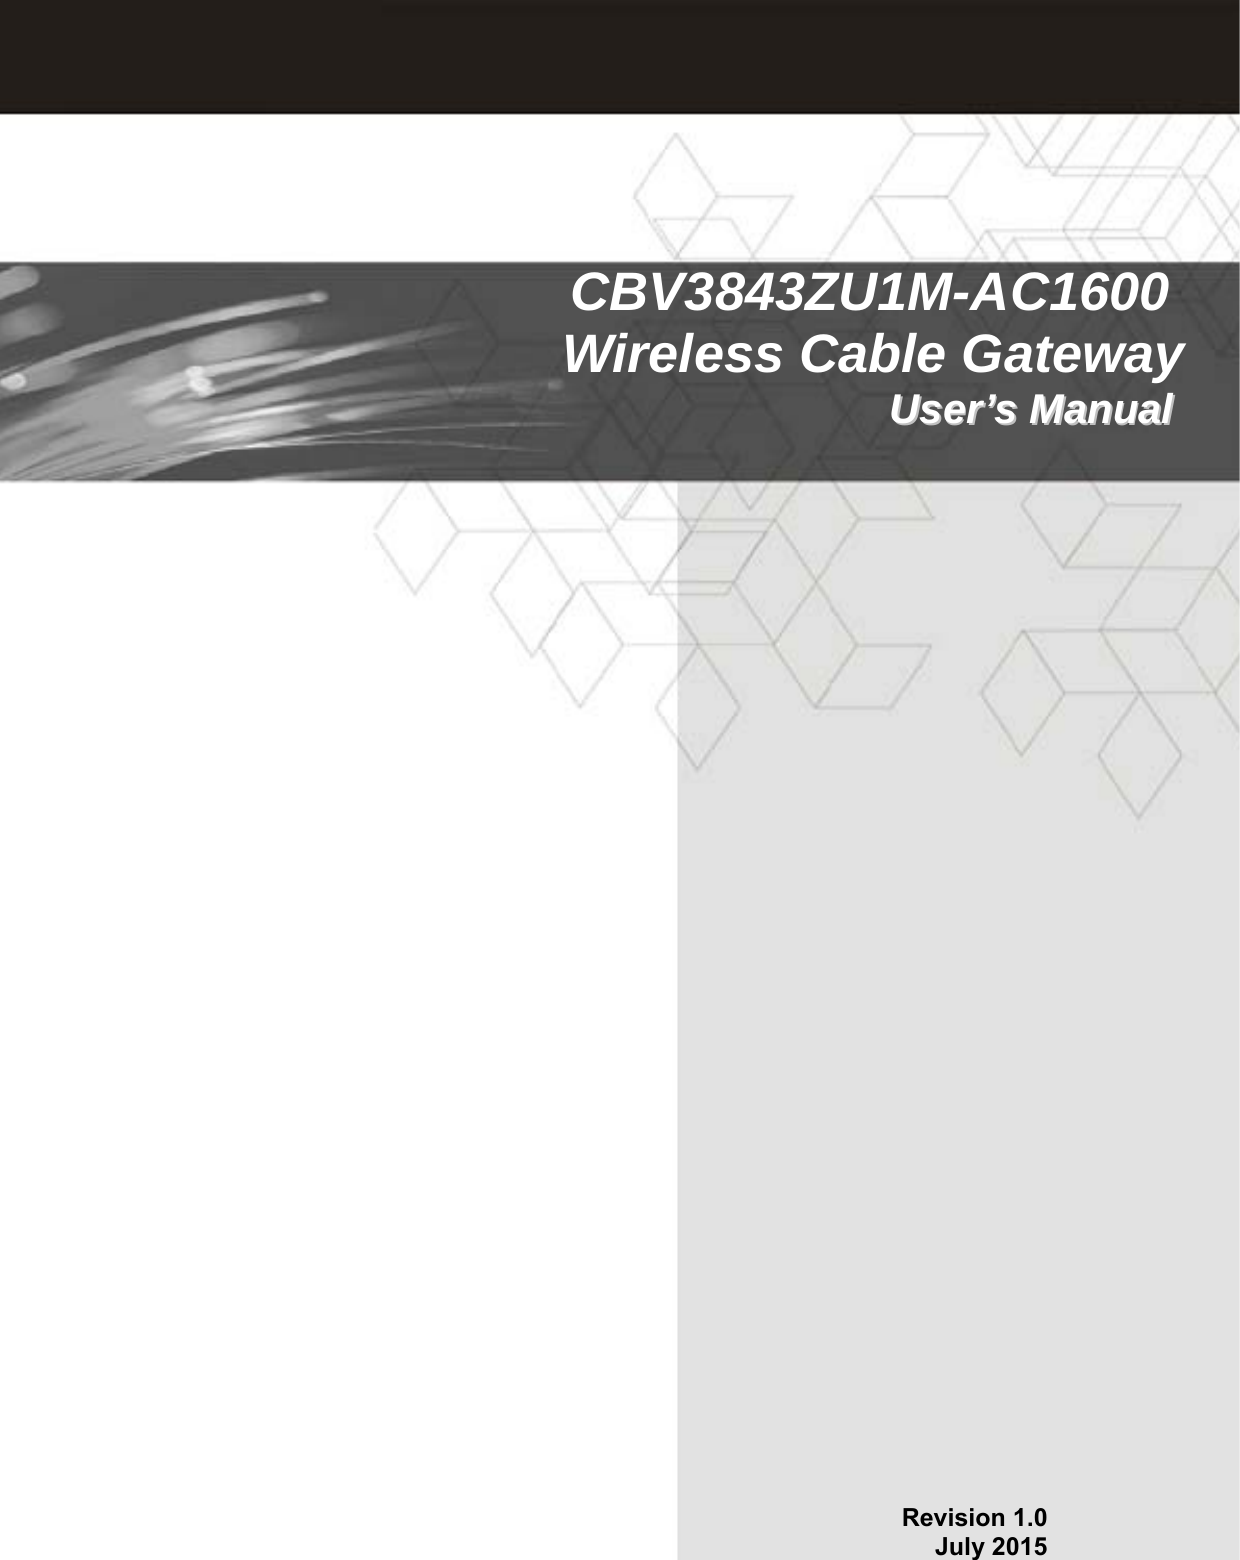   Revision 1.0 July 2015CBV3843ZU1M-AC1600  Wireless Cable GatewayUUsseerr’’ss  MMaannuuaall  